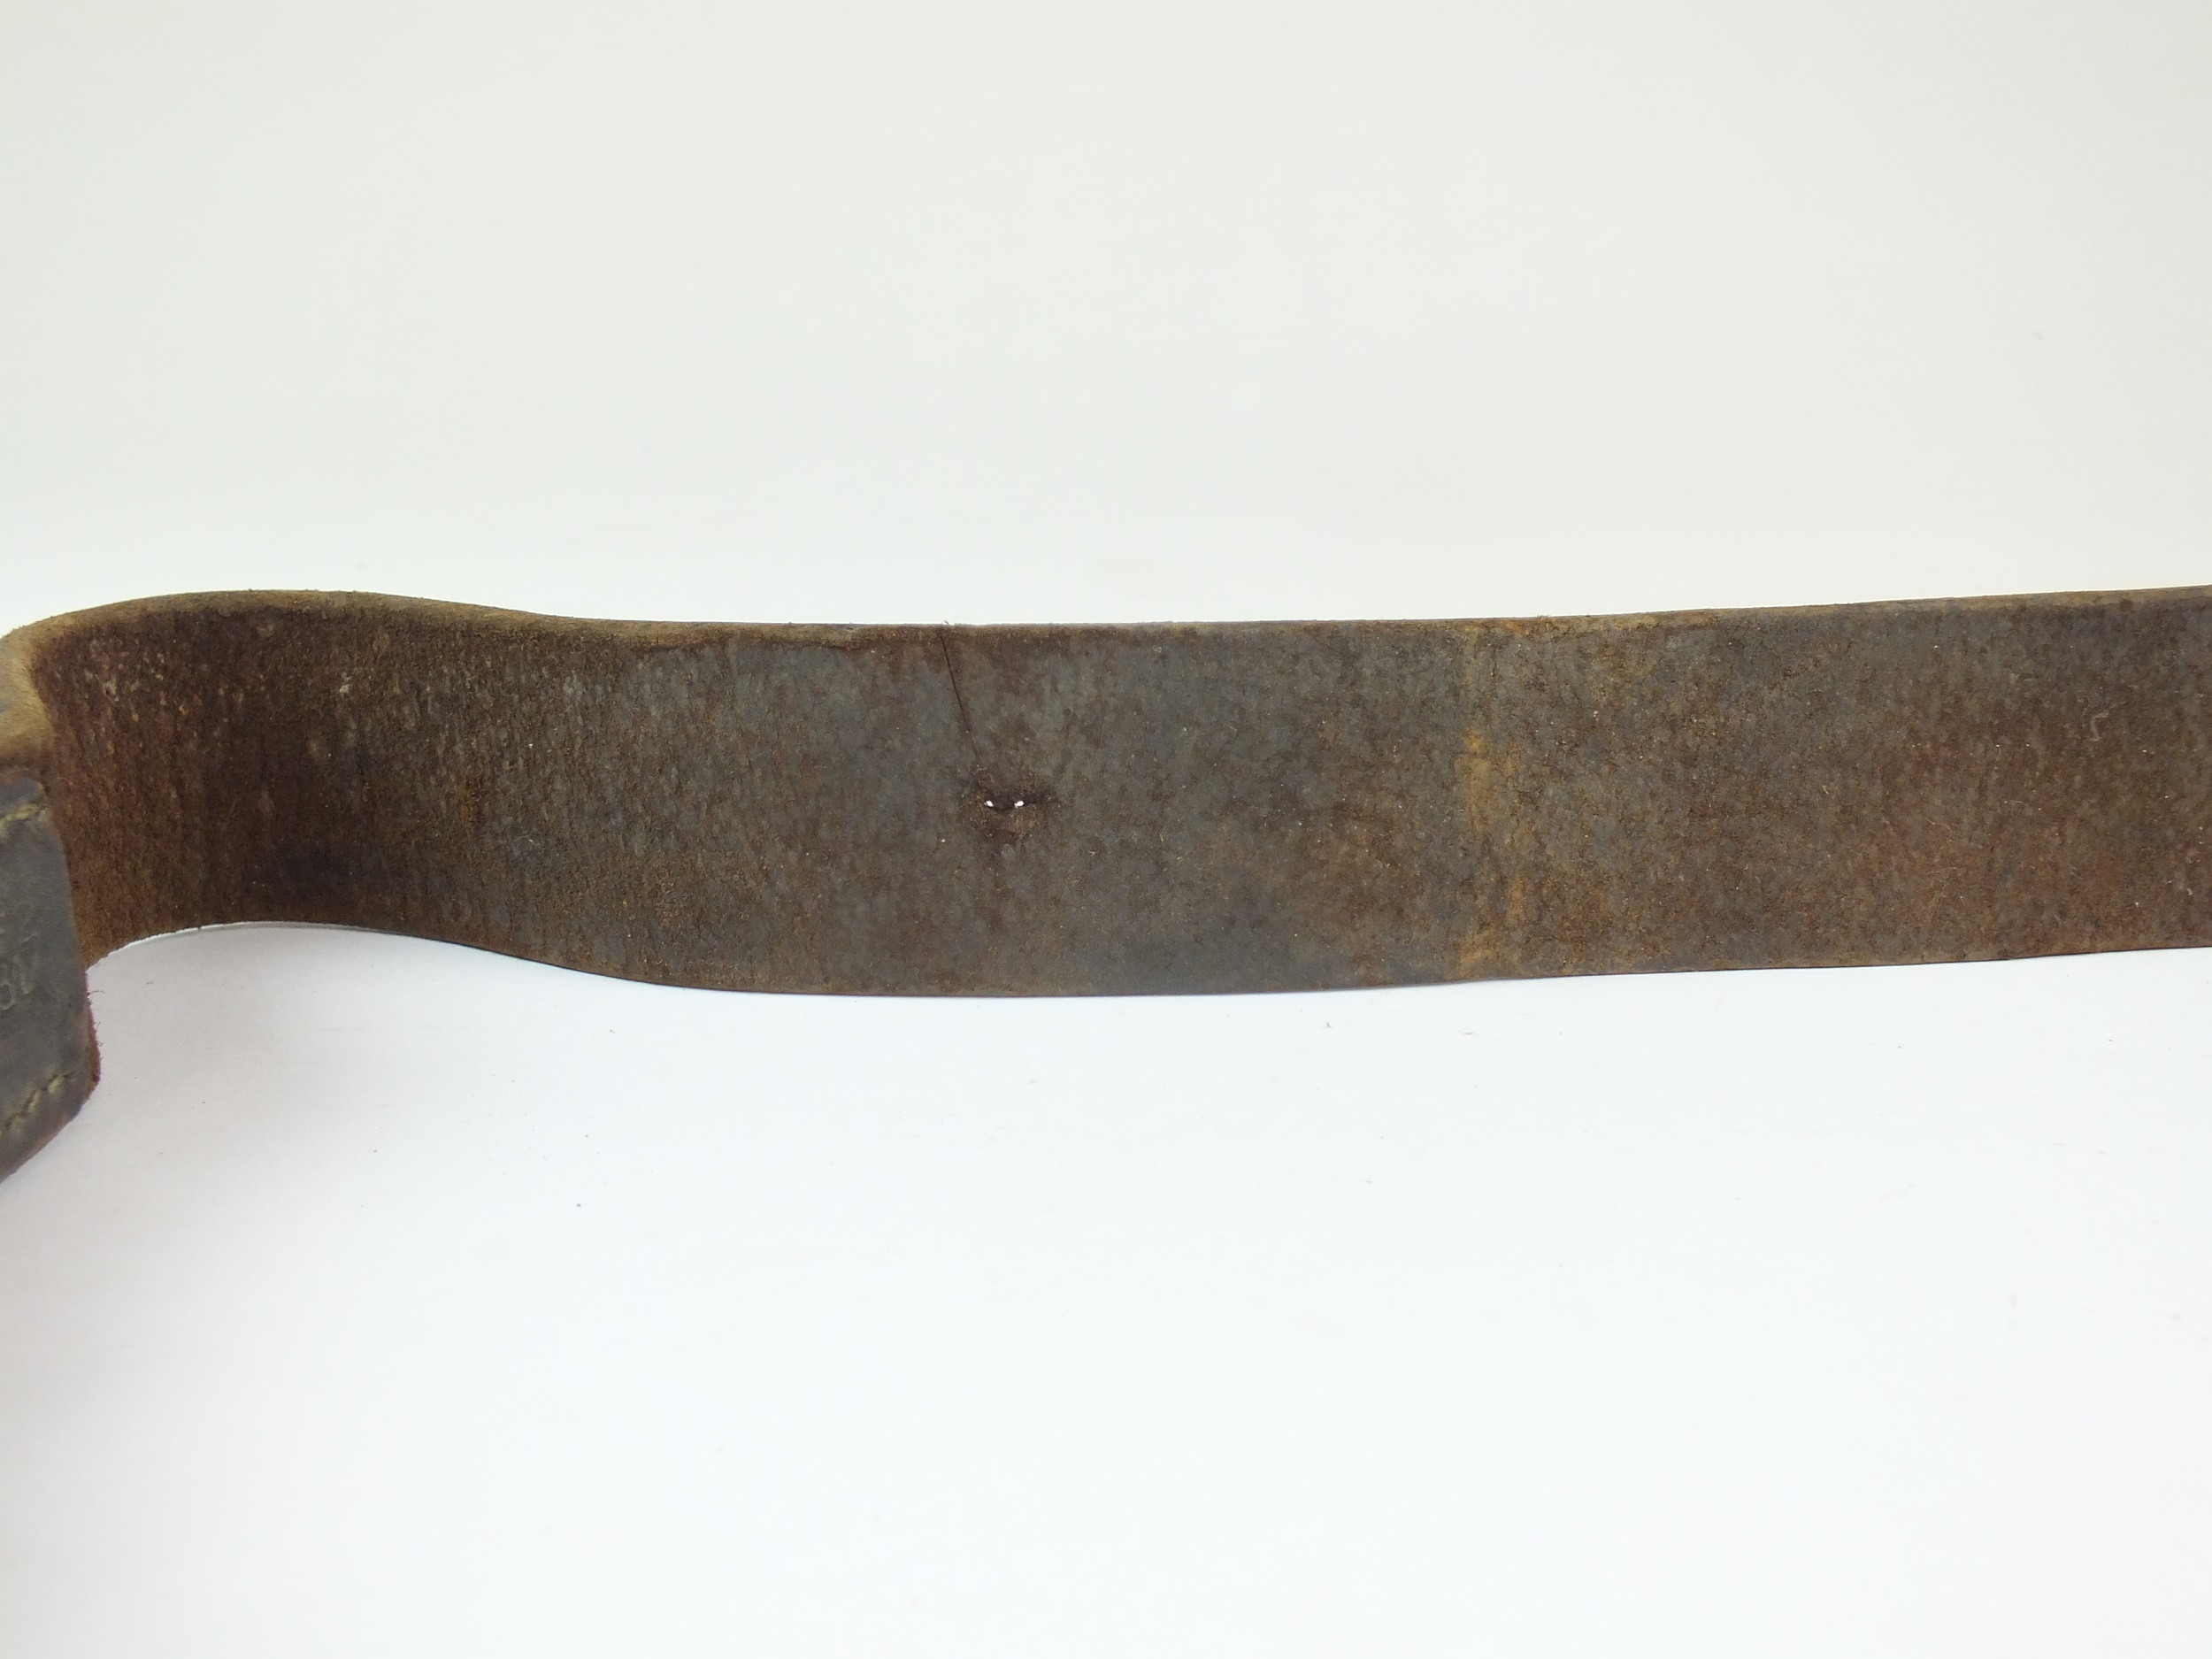 German Hitler Youth belt with buckle - Image 4 of 5